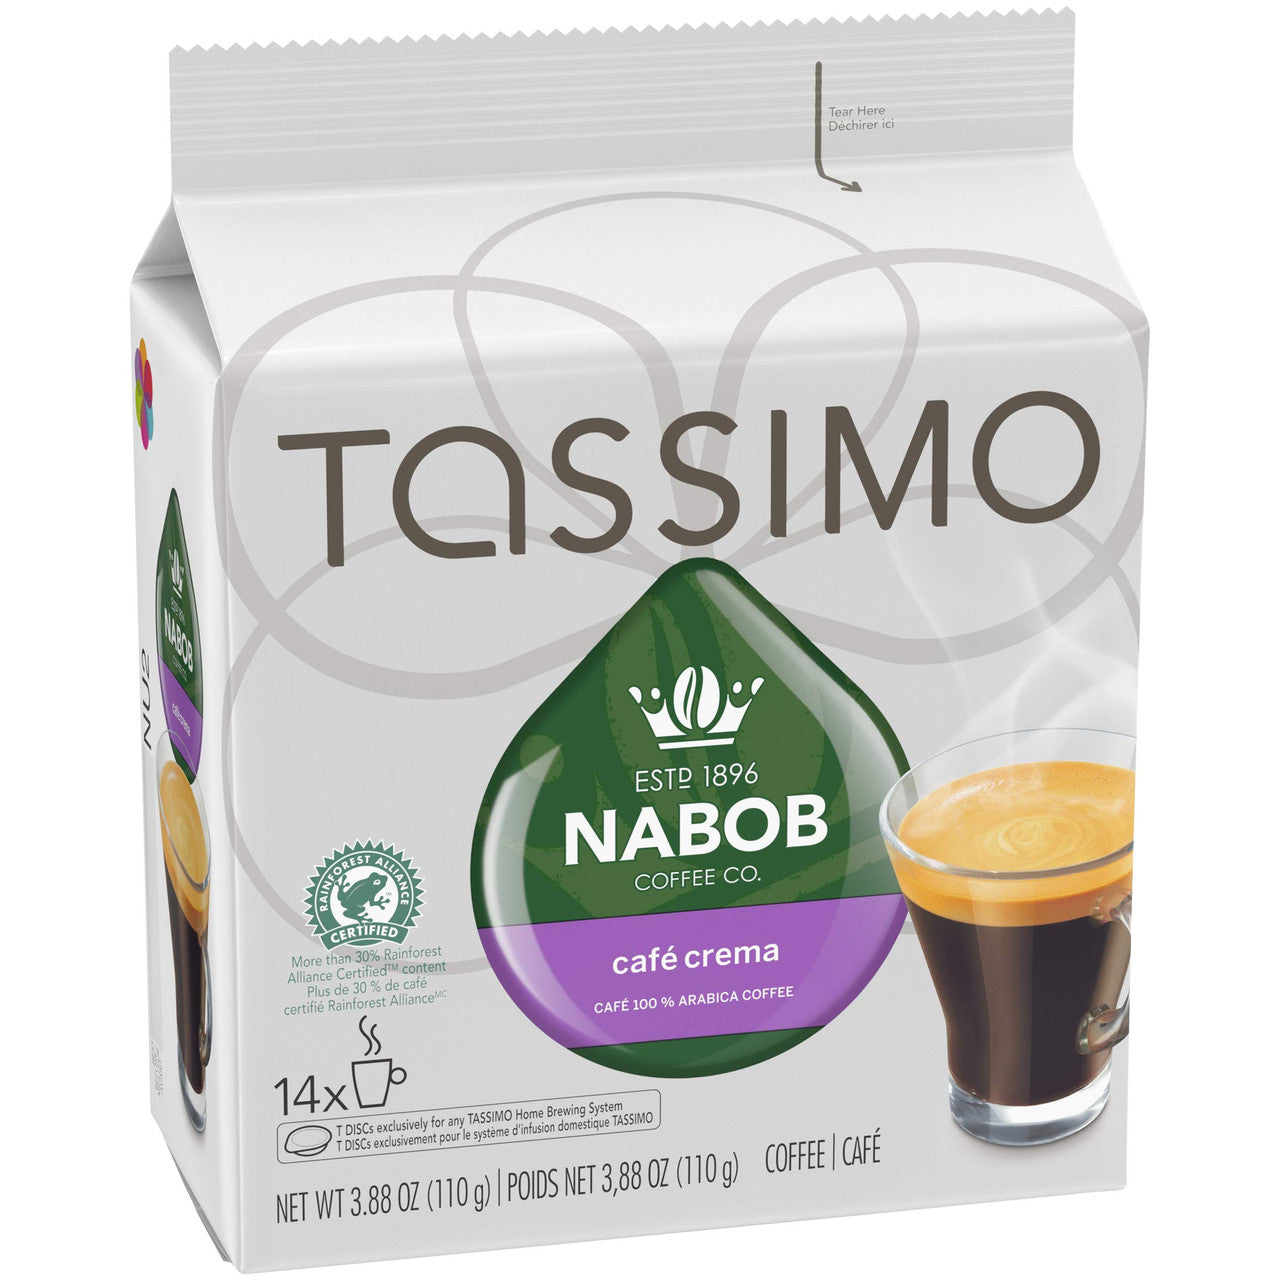 Tassimo Nabob Cafe Crema Coffee, 70 T-Discs (5 Boxes of 14 T-Discs) {Imported from Canada}